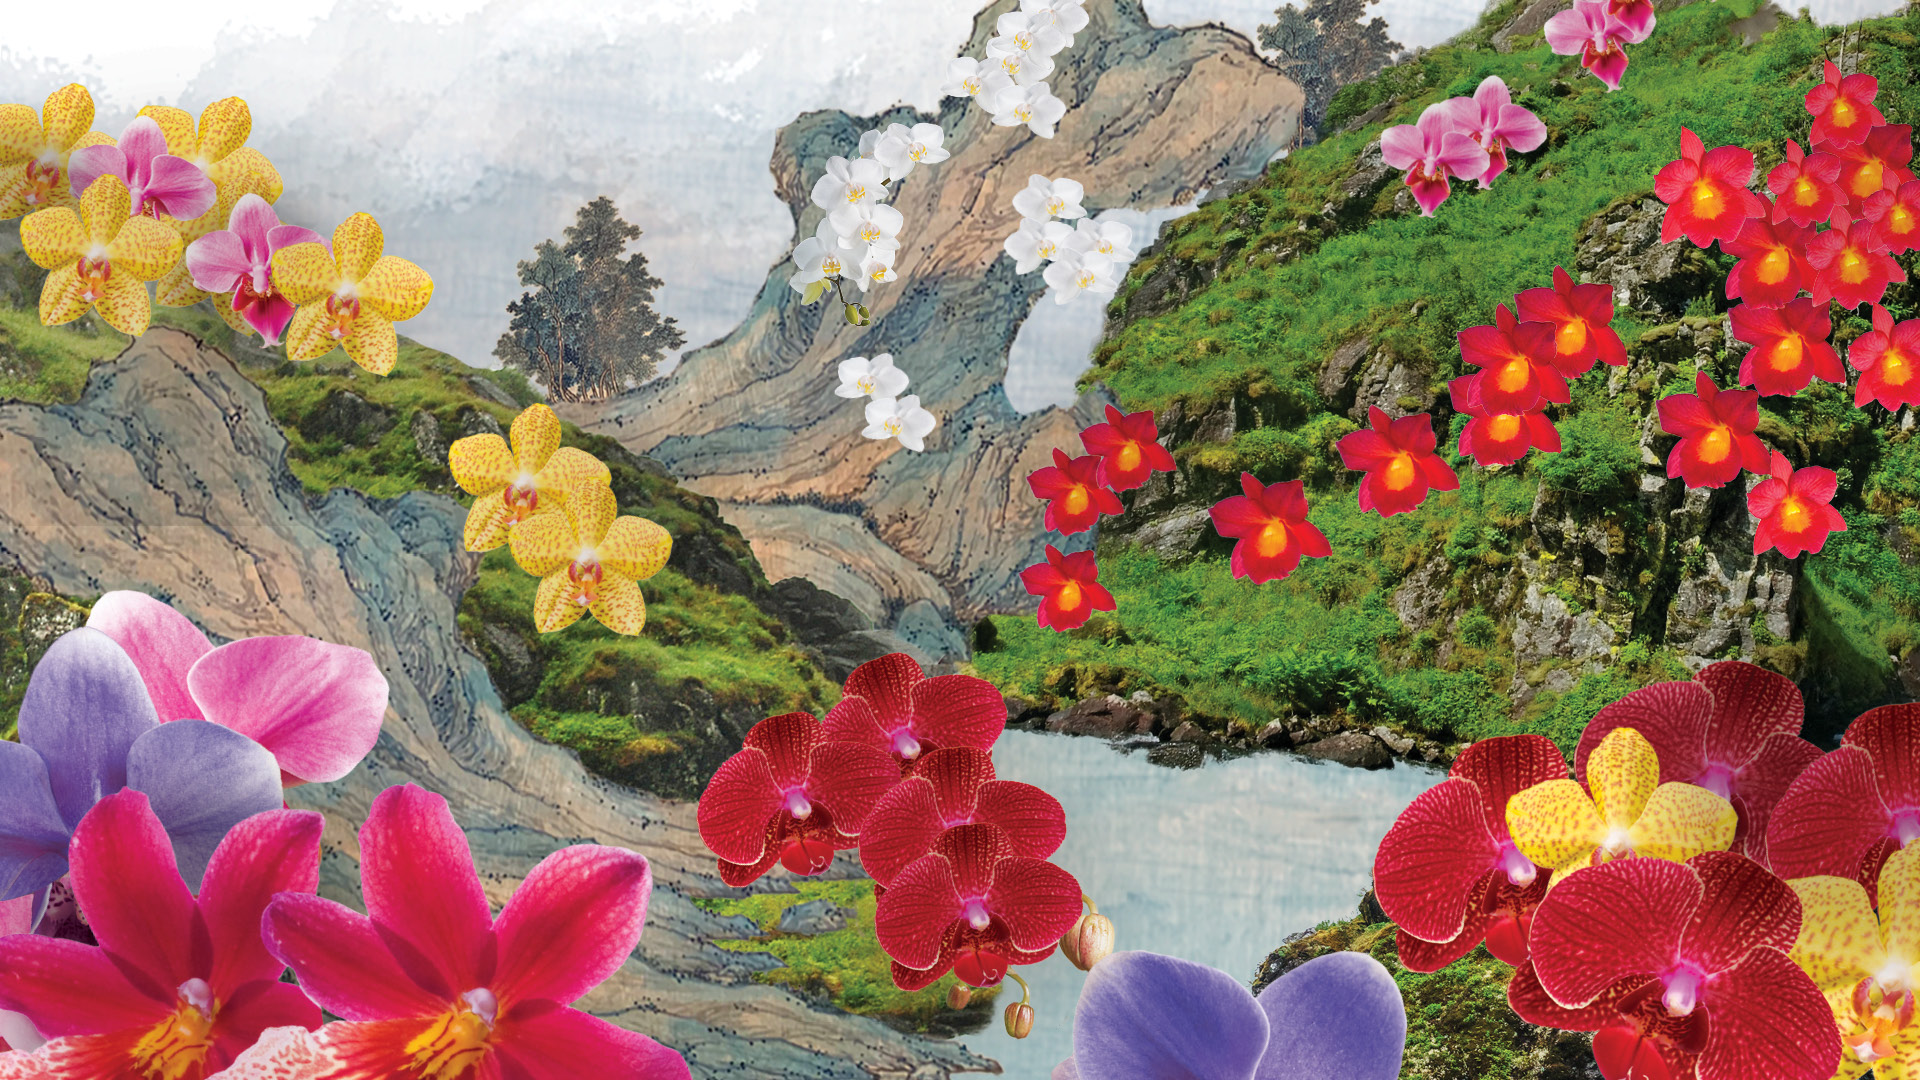 Illustration of real orchids set among rolling hills with green moss and painted landscape over them. Bright pink, red, yellow, and white orchids are placed on top of the rolling mountains in small clumps throughout the landscape to look like they are growing on the various forms. A curving illustrated blue water river cuts through the rolling hills.